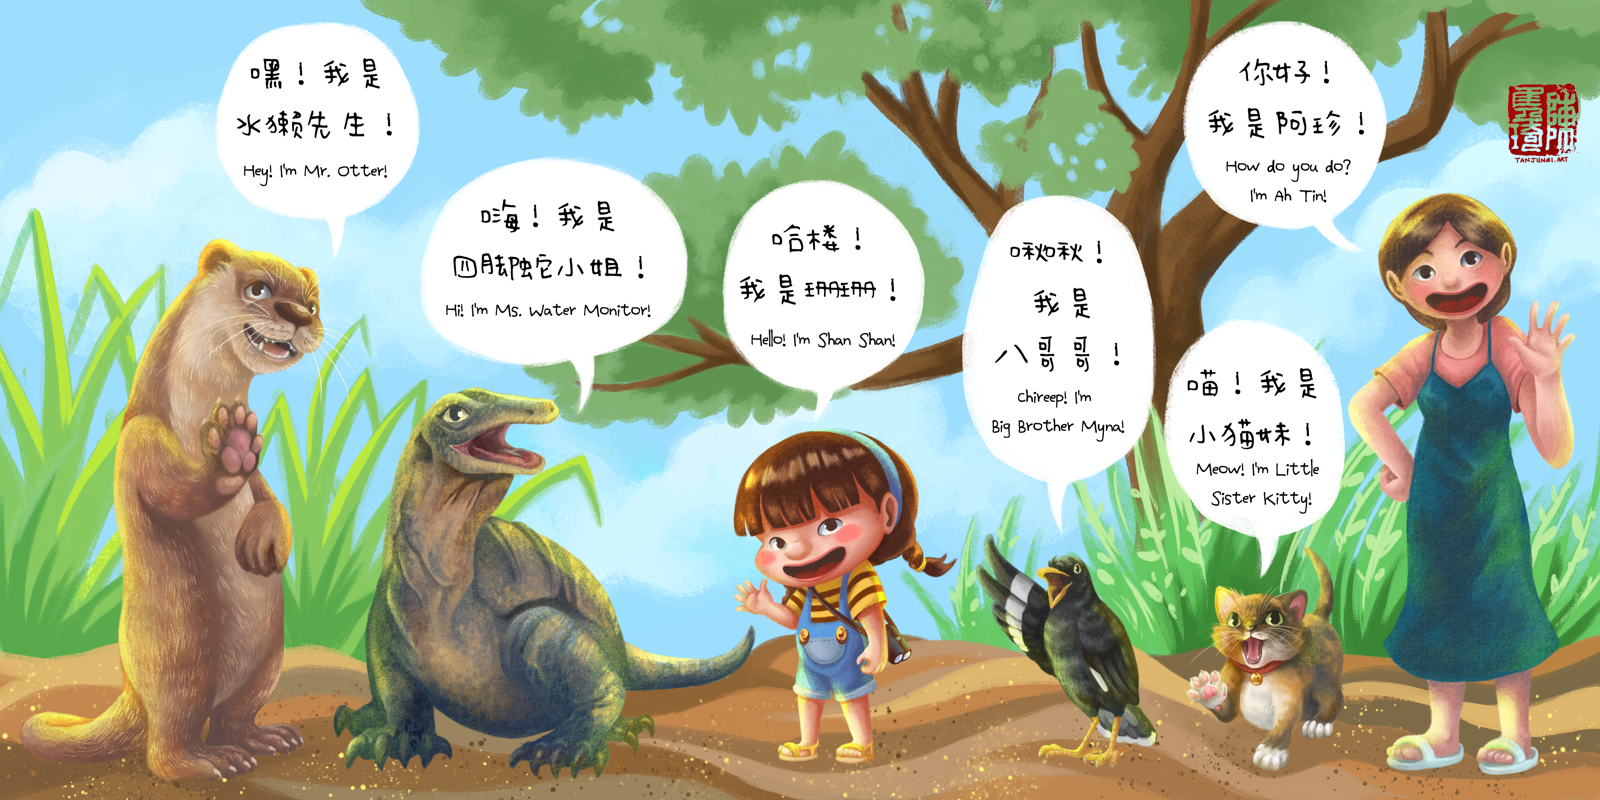 Overview of the 6 characters in the children's book project Shan Shan's World. Each character is waving at the viewer and saying hello with a soeech bubble over their head. Characters are: Mr. Otter, Ms. Water Monitor, Shan Shan, Big Brother Myna, Little Sister Kitty, and Ah Tin (Shan Shan' mom).